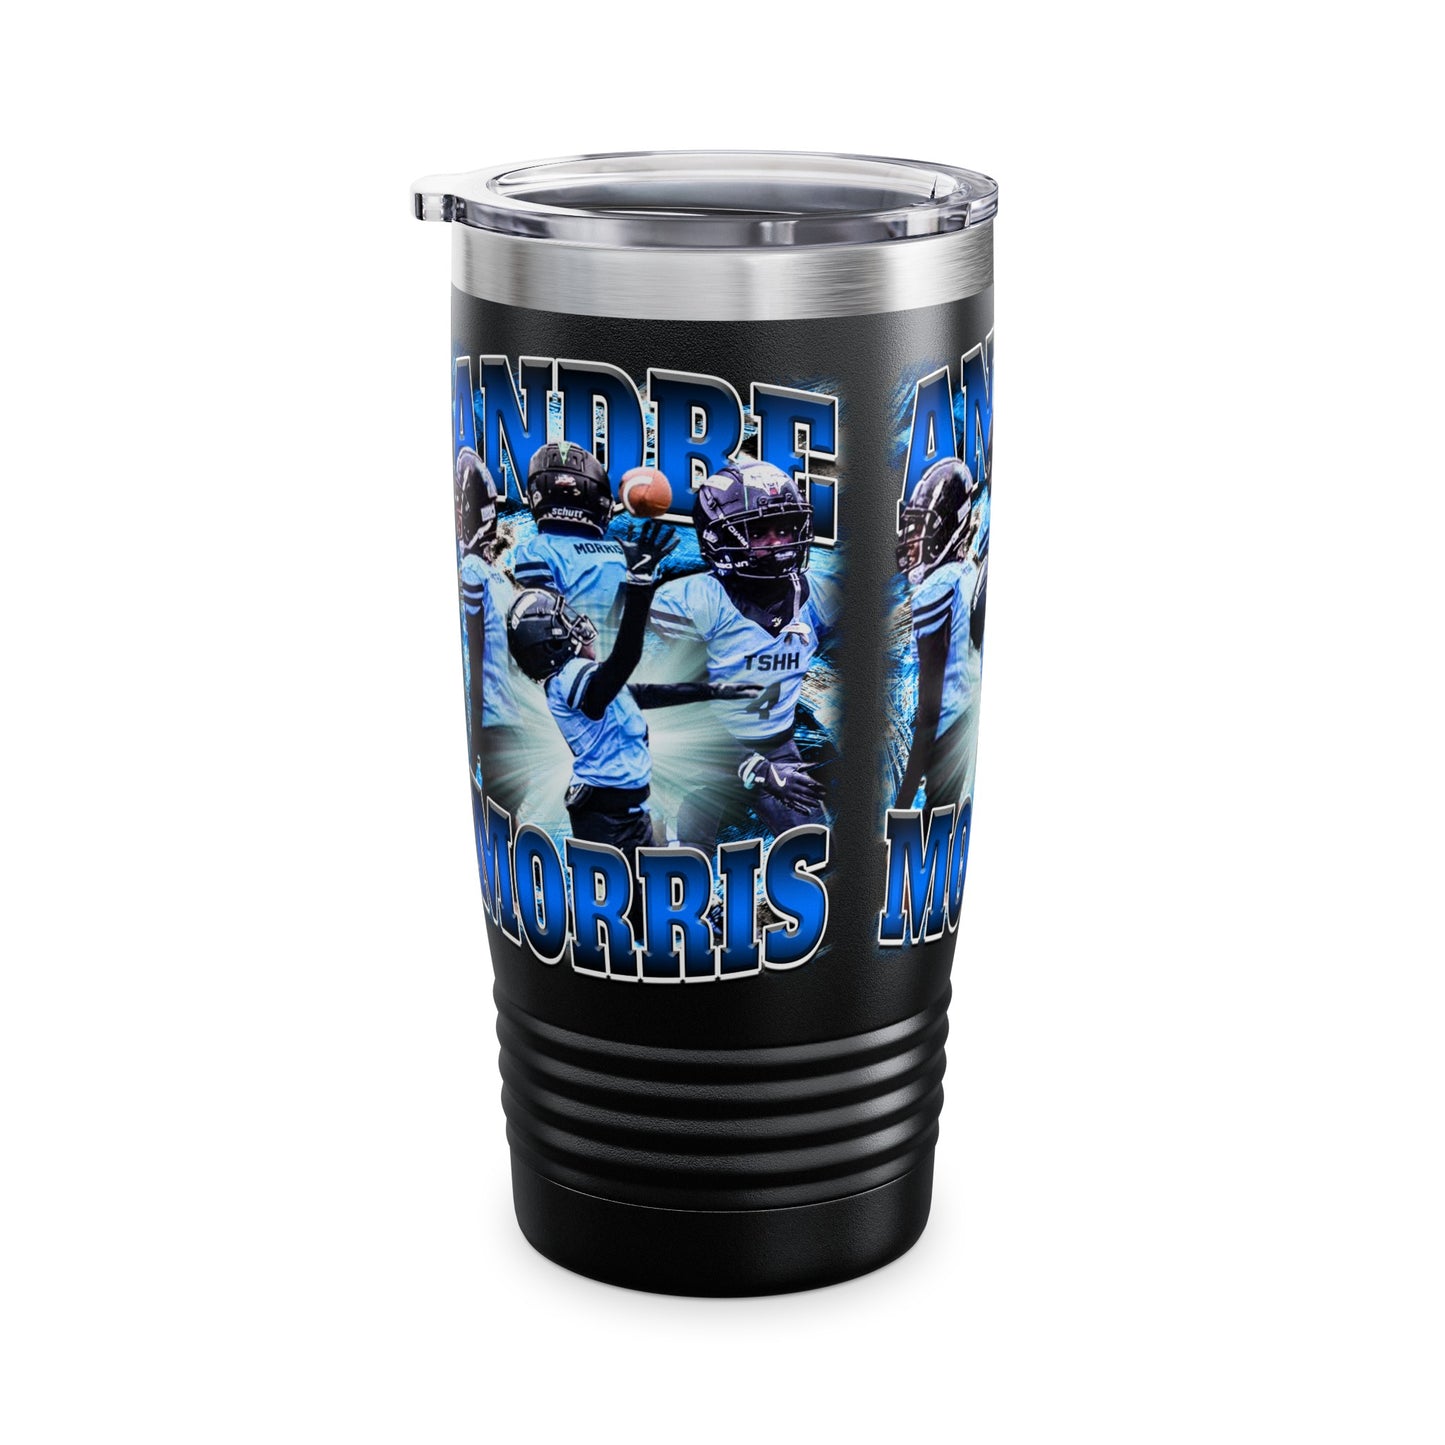 Andre Morris Stainless Steal Tumbler